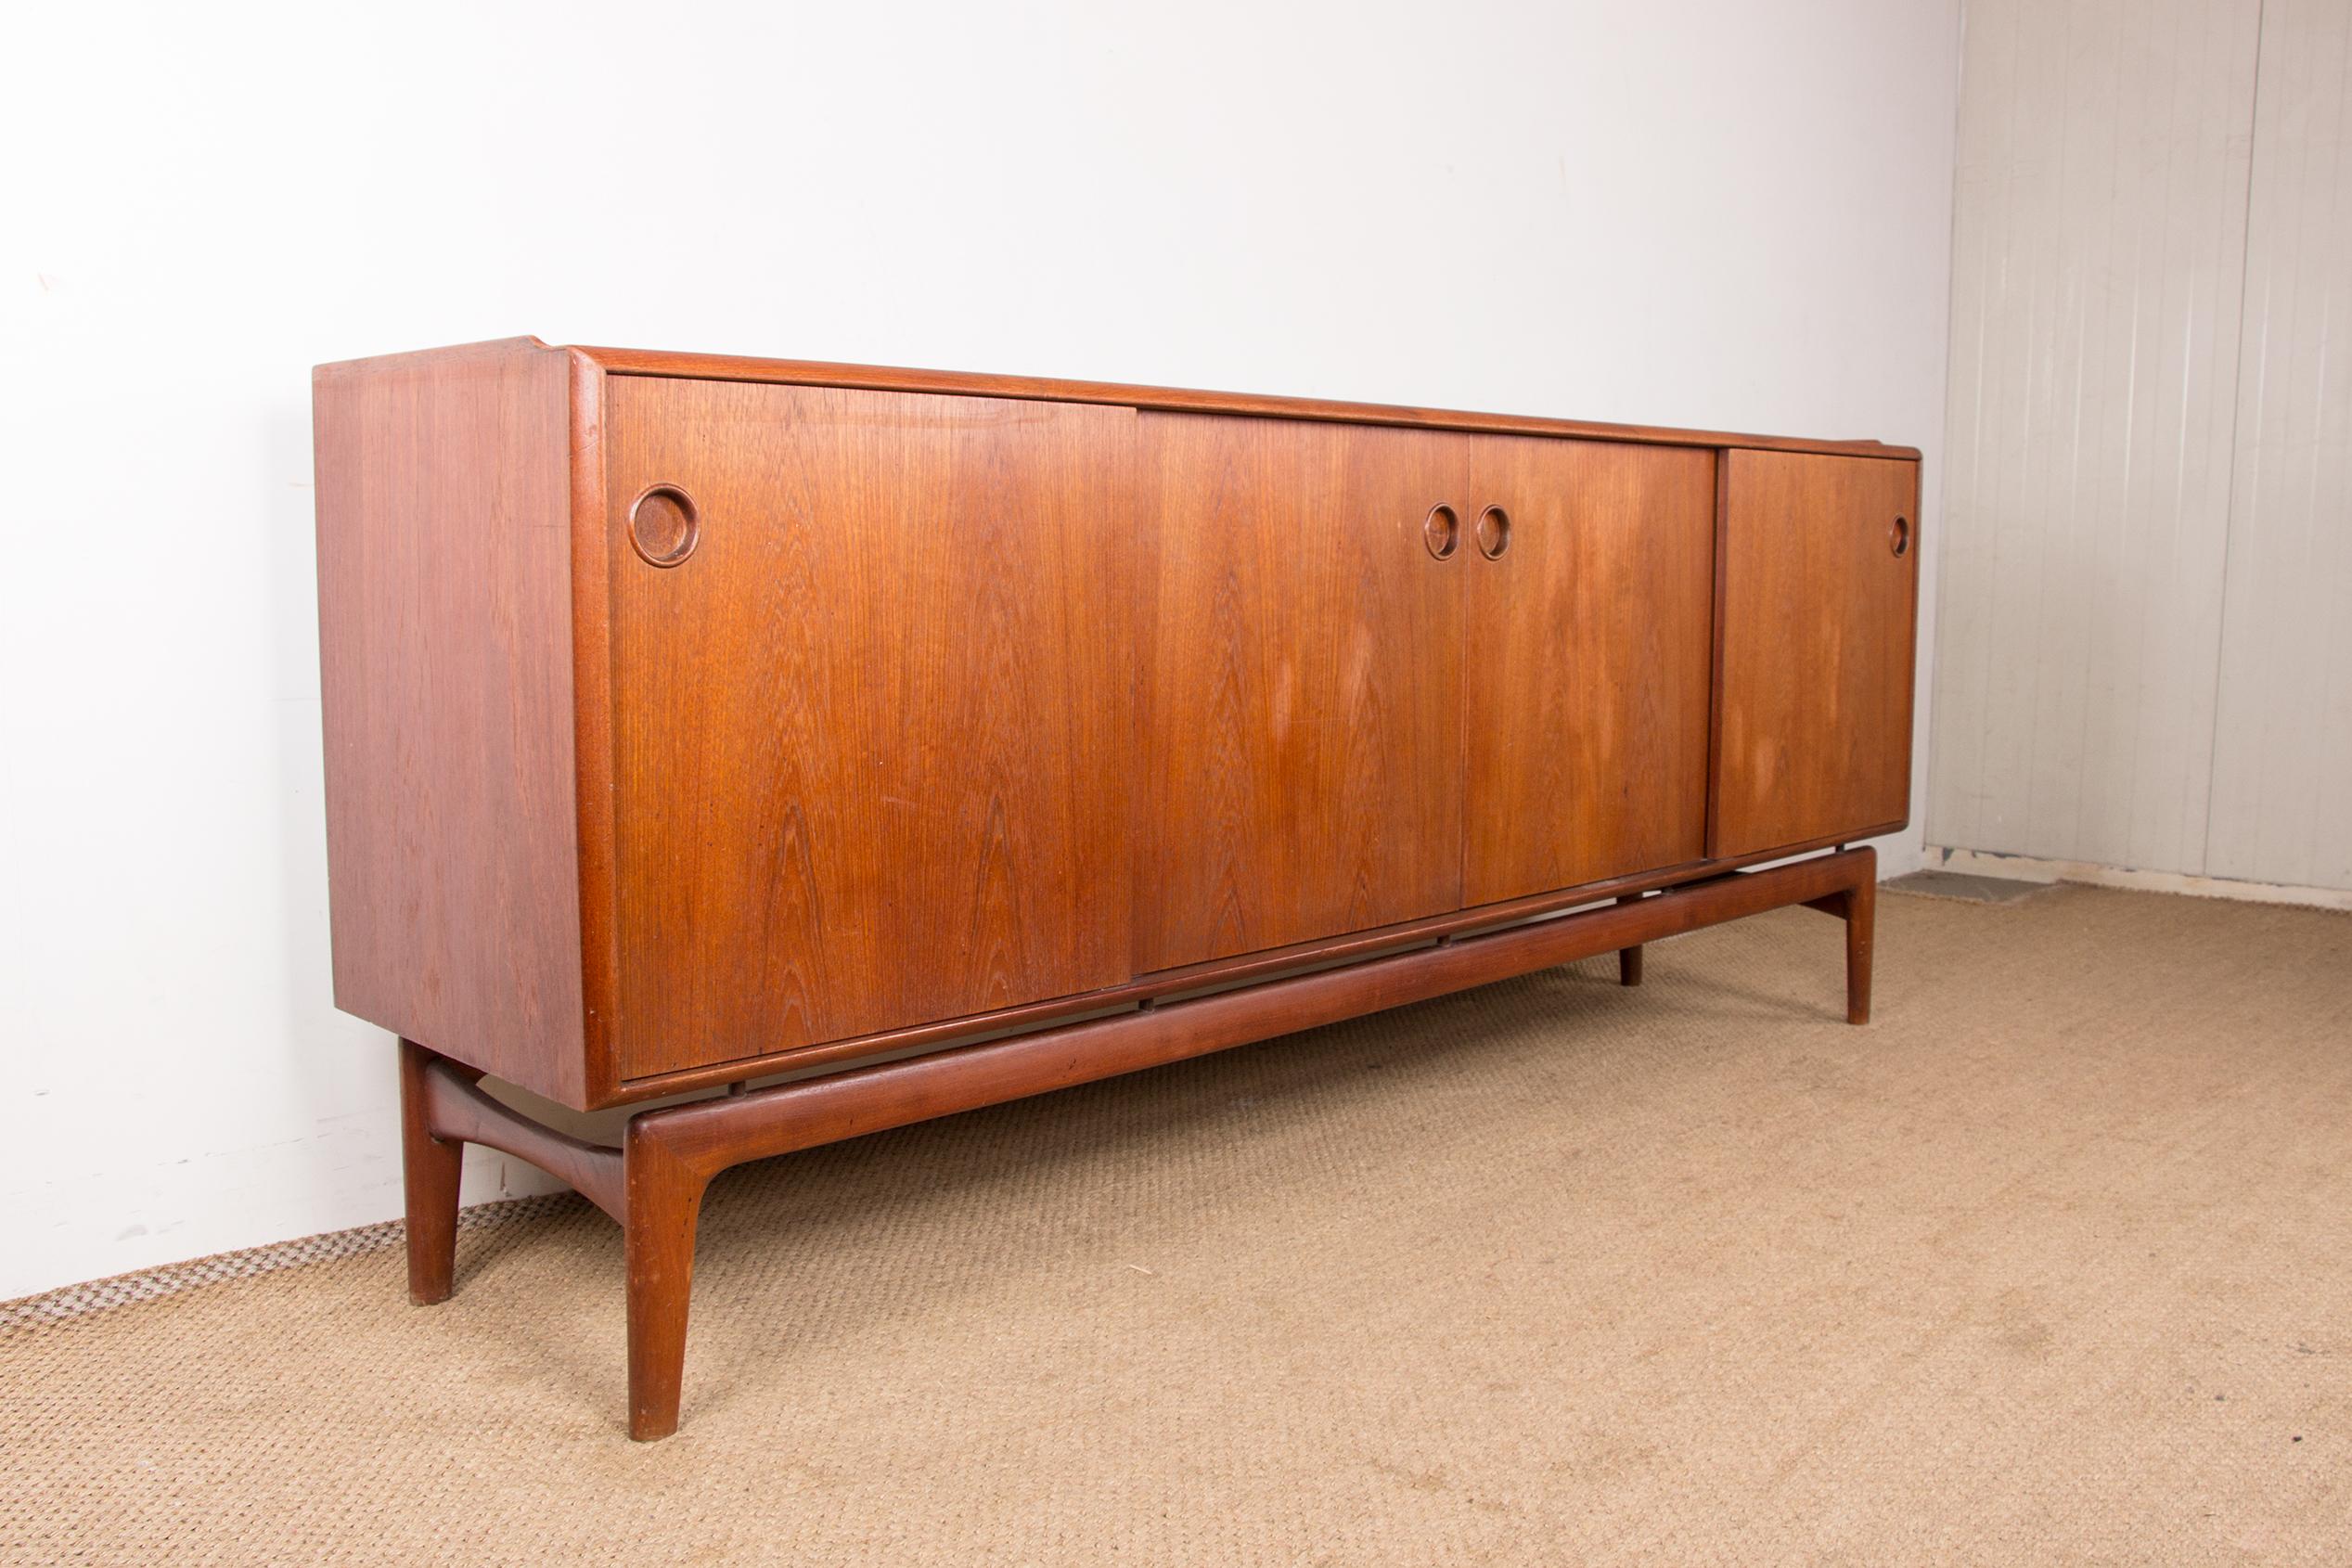 Superb Scandinavian sideboard that can be used as a Sideboard because it is veneered in teak on its rear side. 
4 sliding doors, the left door opens onto 6 interior drawers, the two middle doors open onto a very large shelf and the right door opens